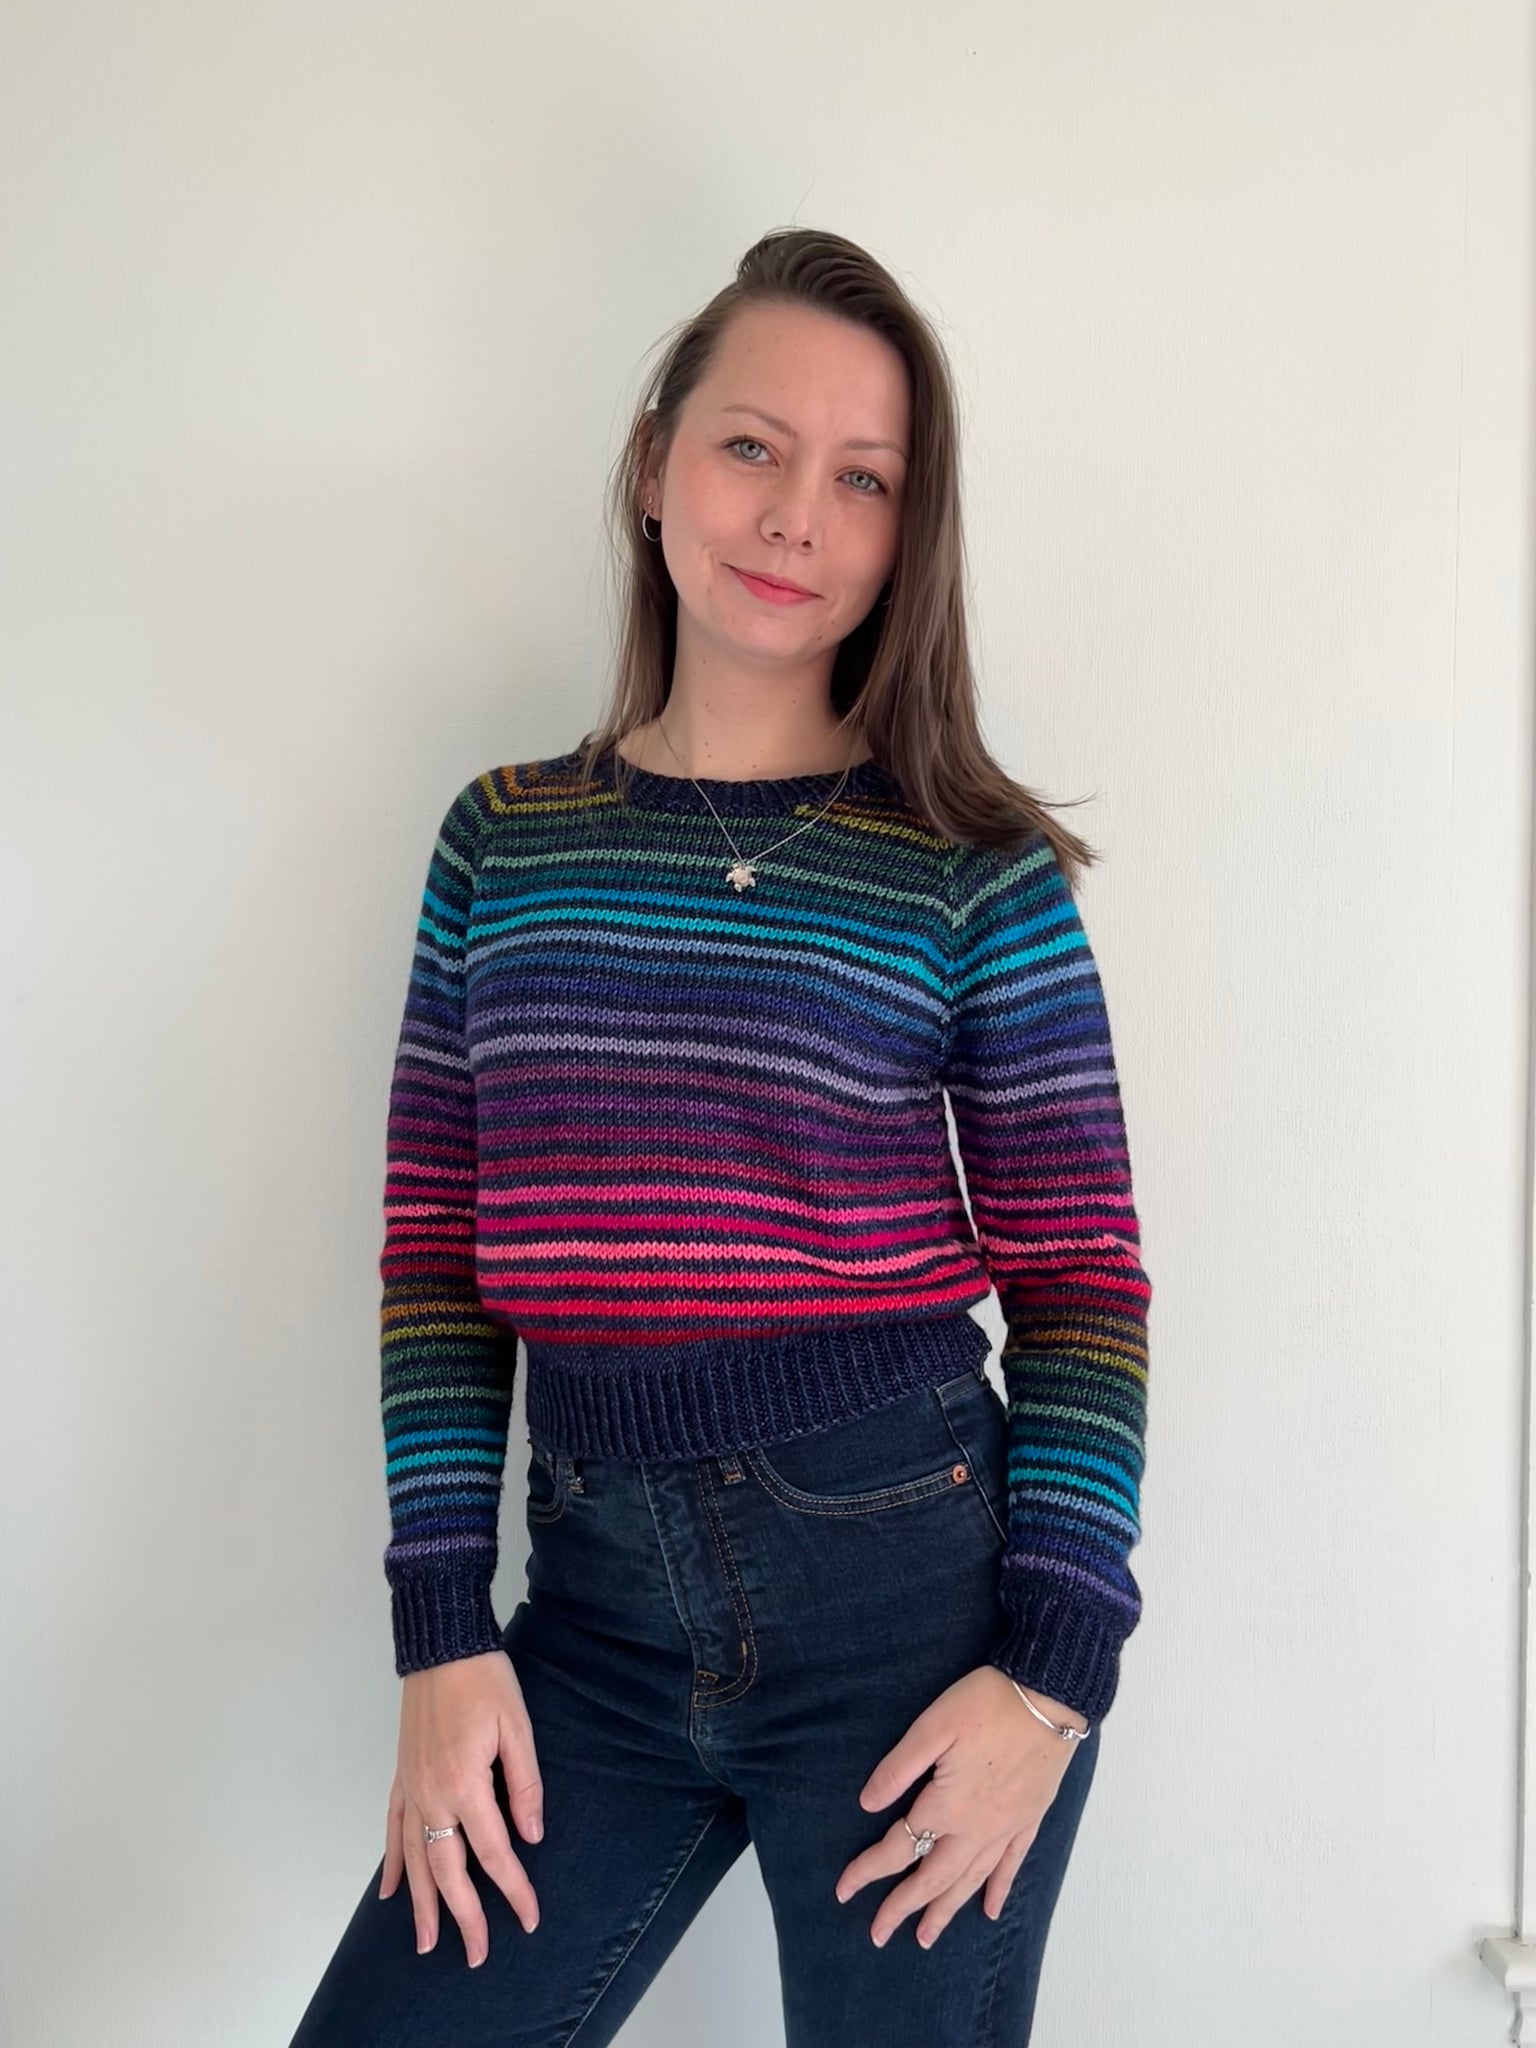 Scrappy Stripes Sweater - Knitting Pattern – Mary Made That Designs